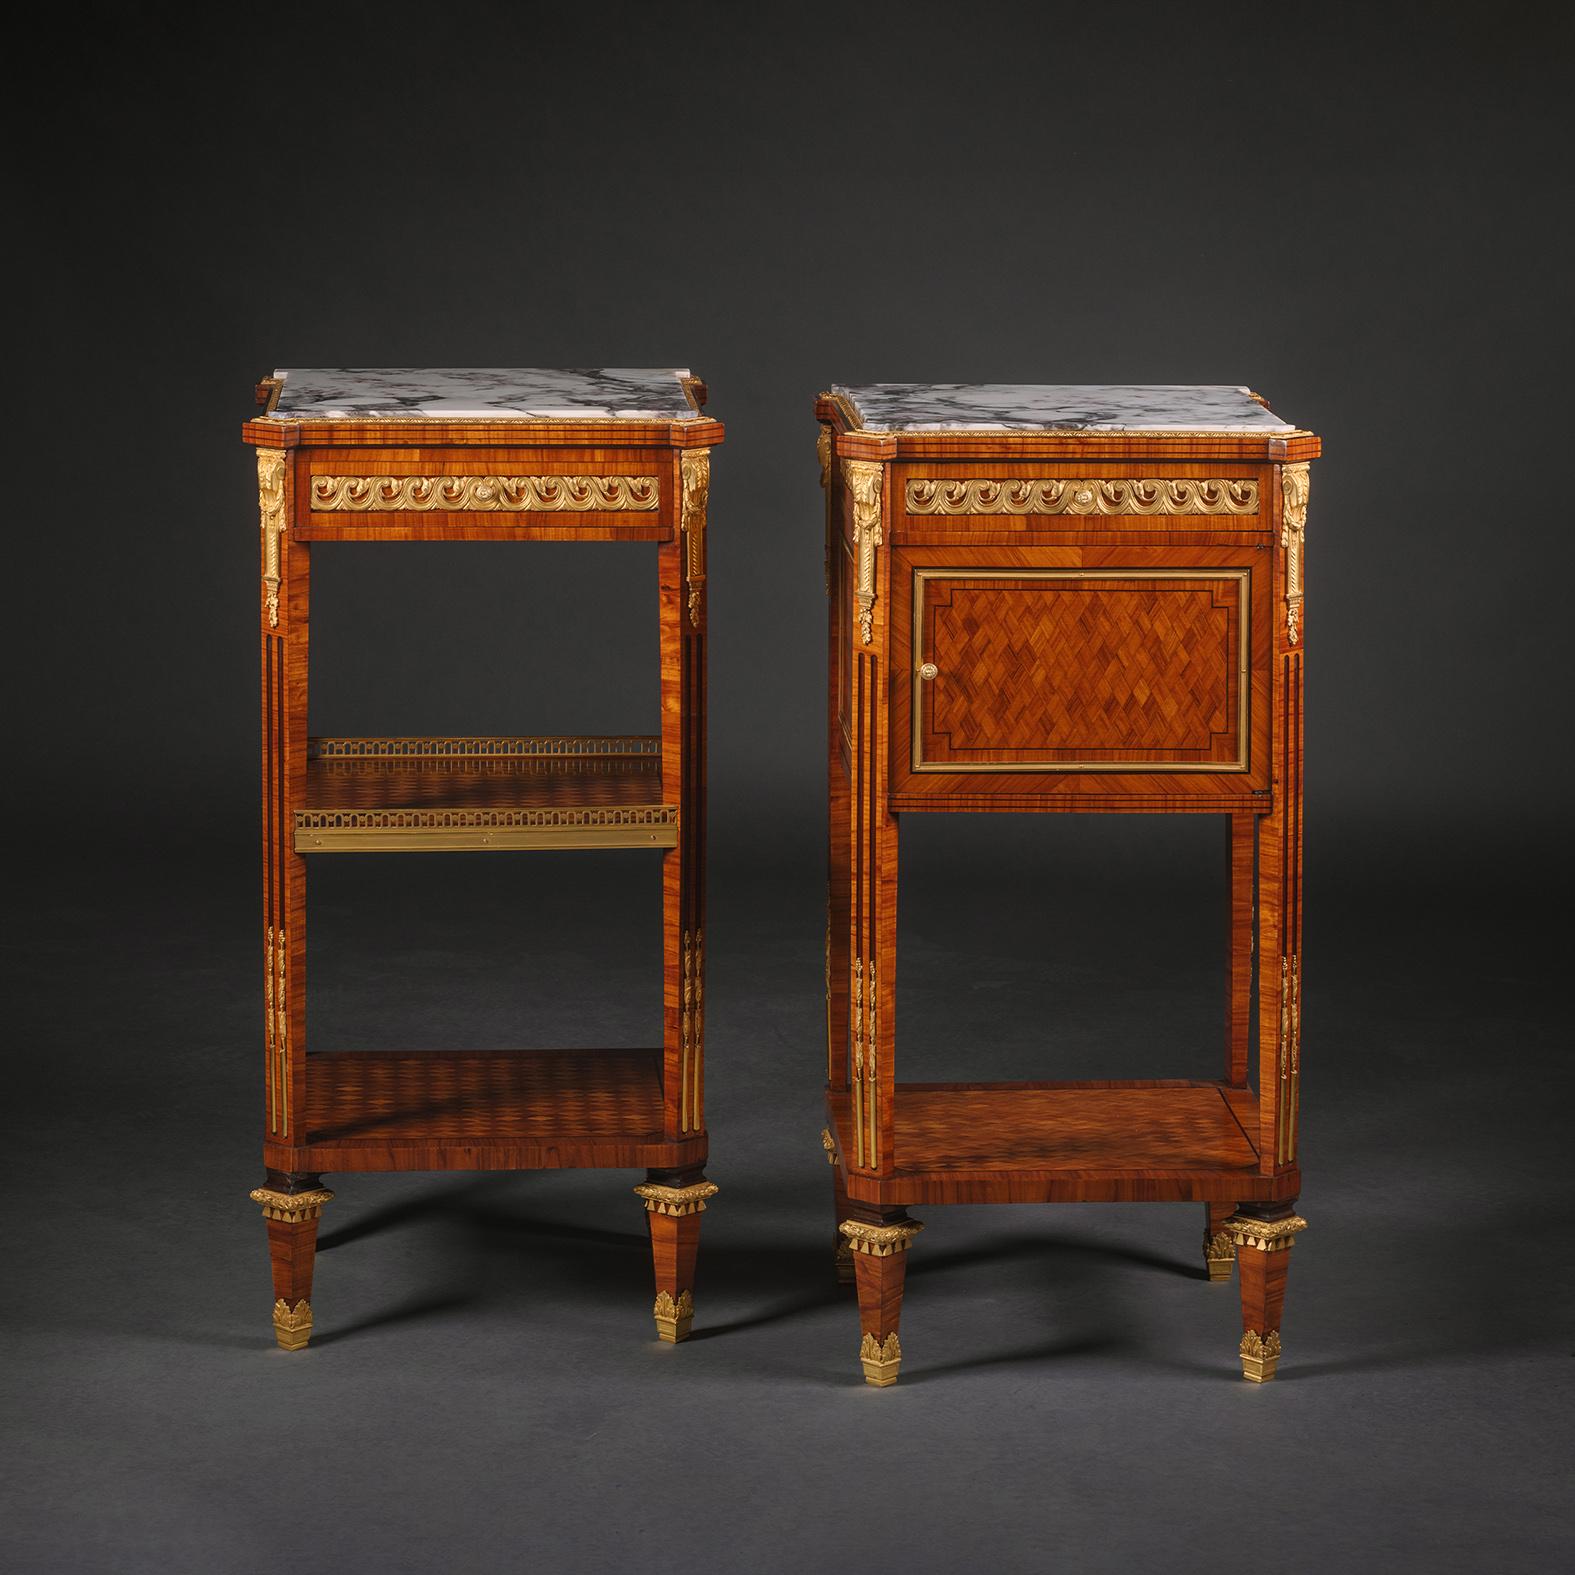 Pair of Louis XVI Style Gilt-Bronze Mounted Parquetry beside Tables For Sale 2